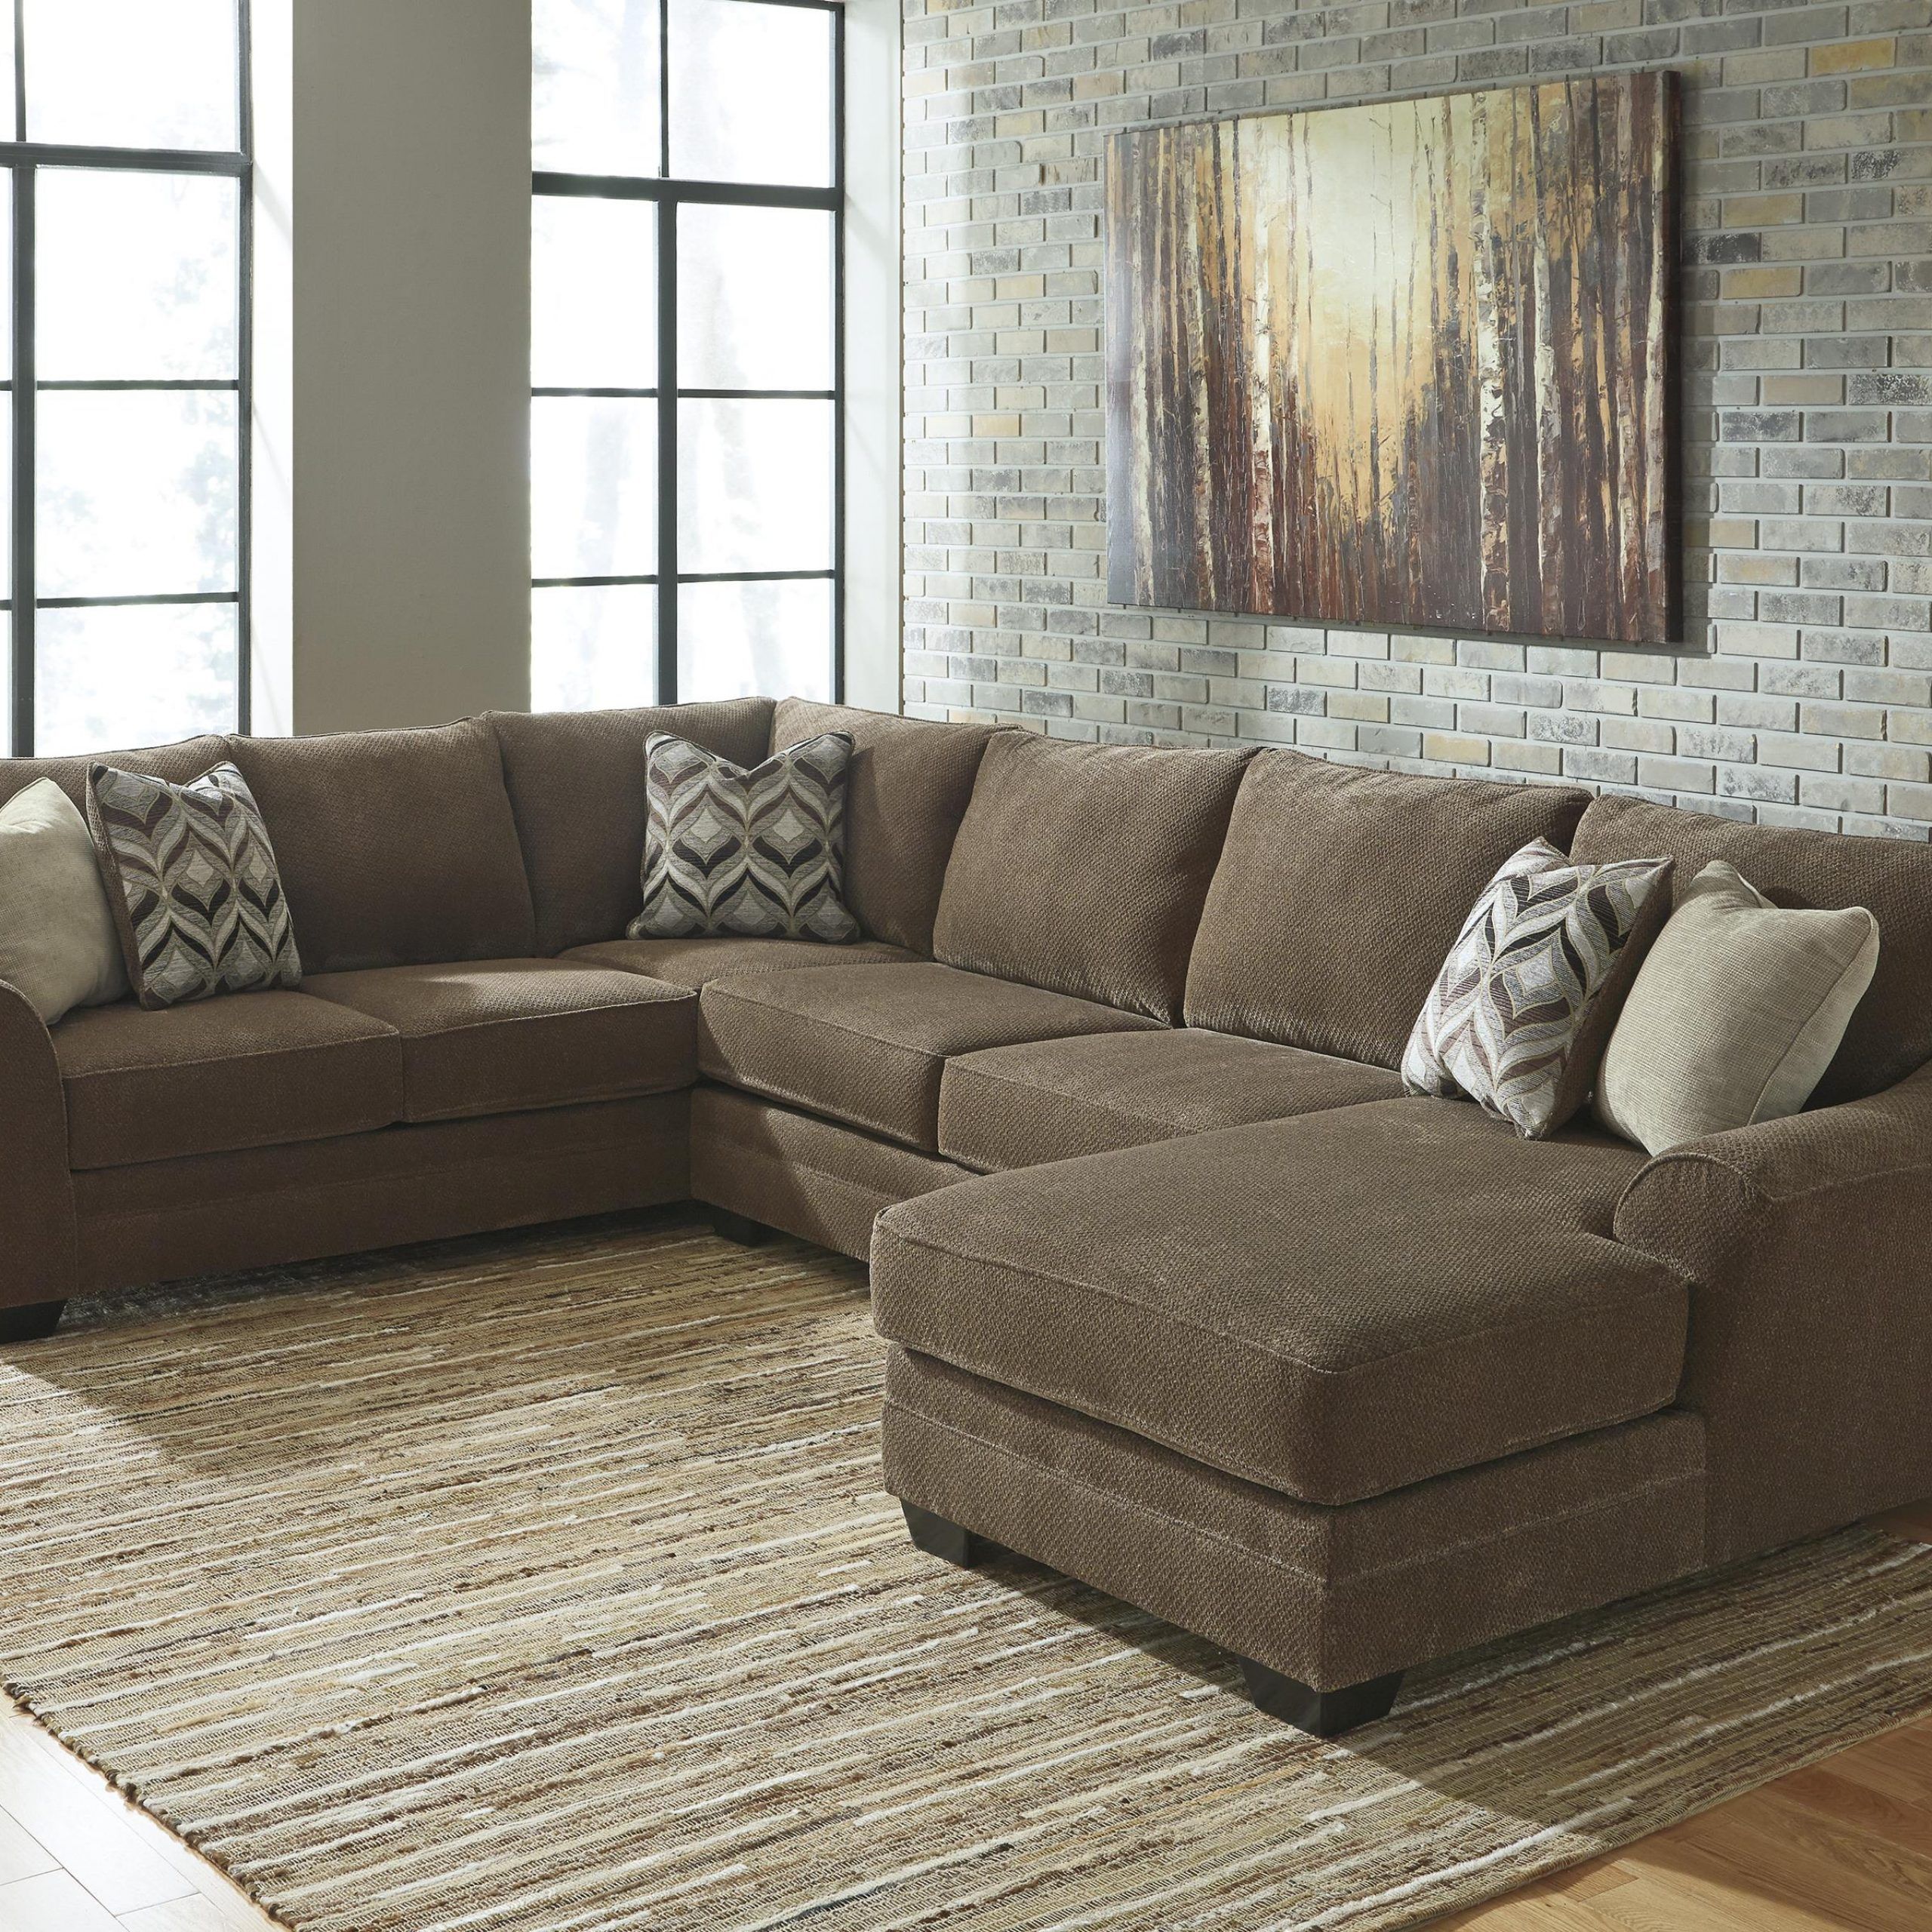 Benchcraft Justyna Contemporary 3 Piece Sectional With Pertaining To 3pc Polyfiber Sectional Sofas (View 3 of 15)